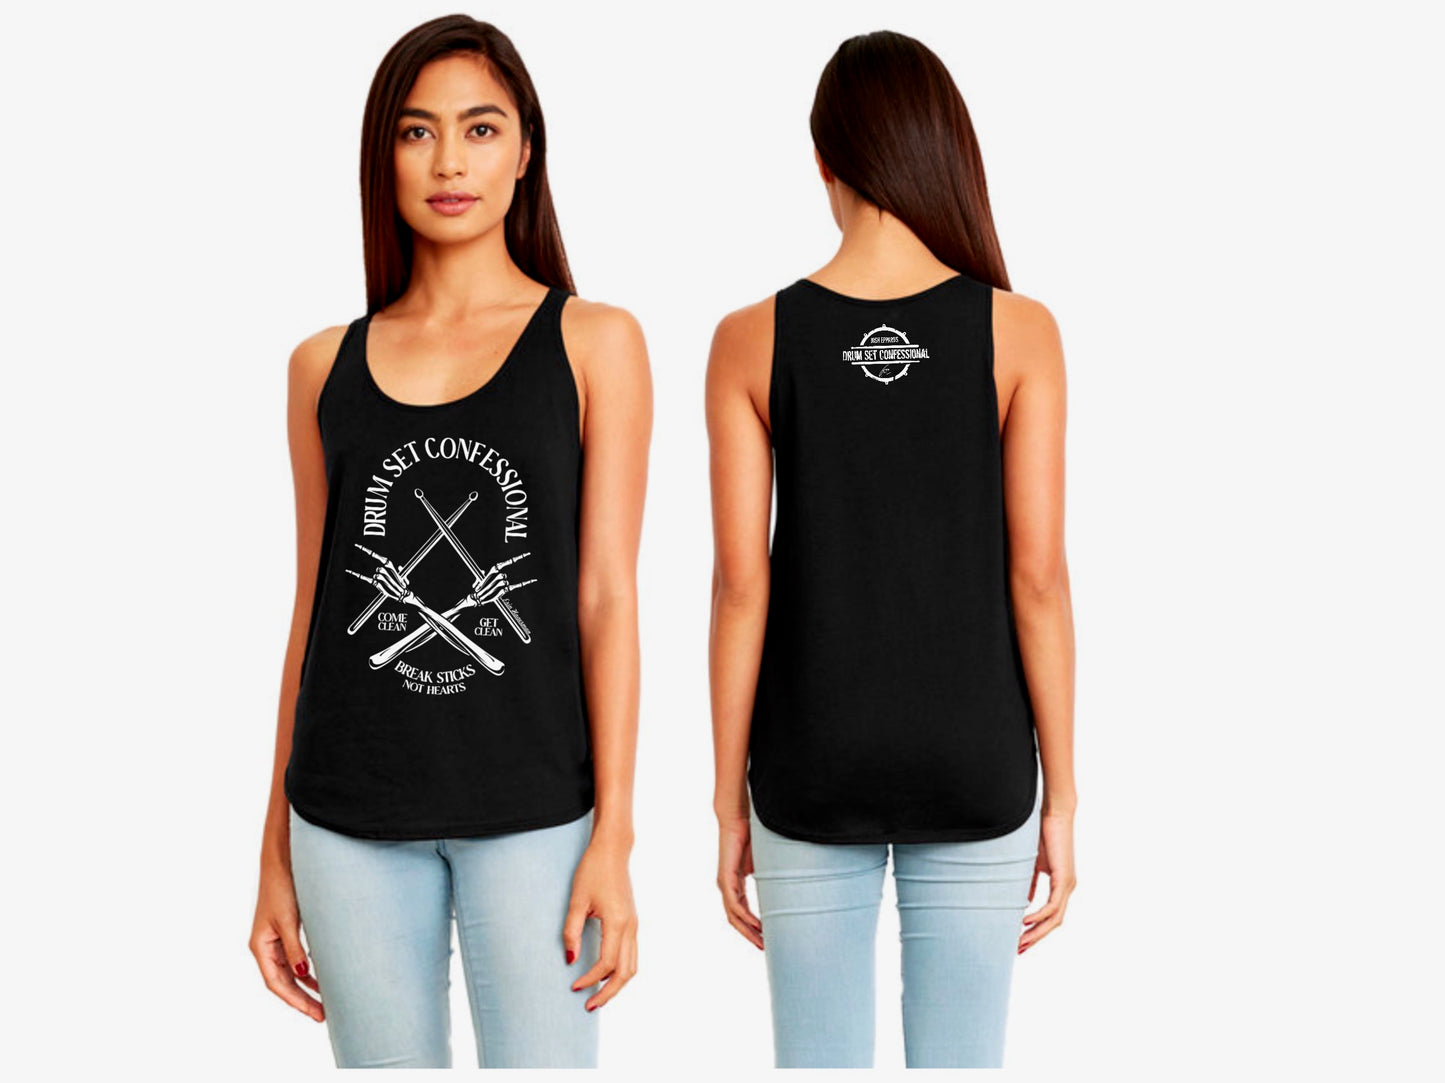 DSC "Bones" Black Next Level Apparel Ladies' Festival Tank (100% of profits fuel outreach and donations to addiction/recovery causes.)